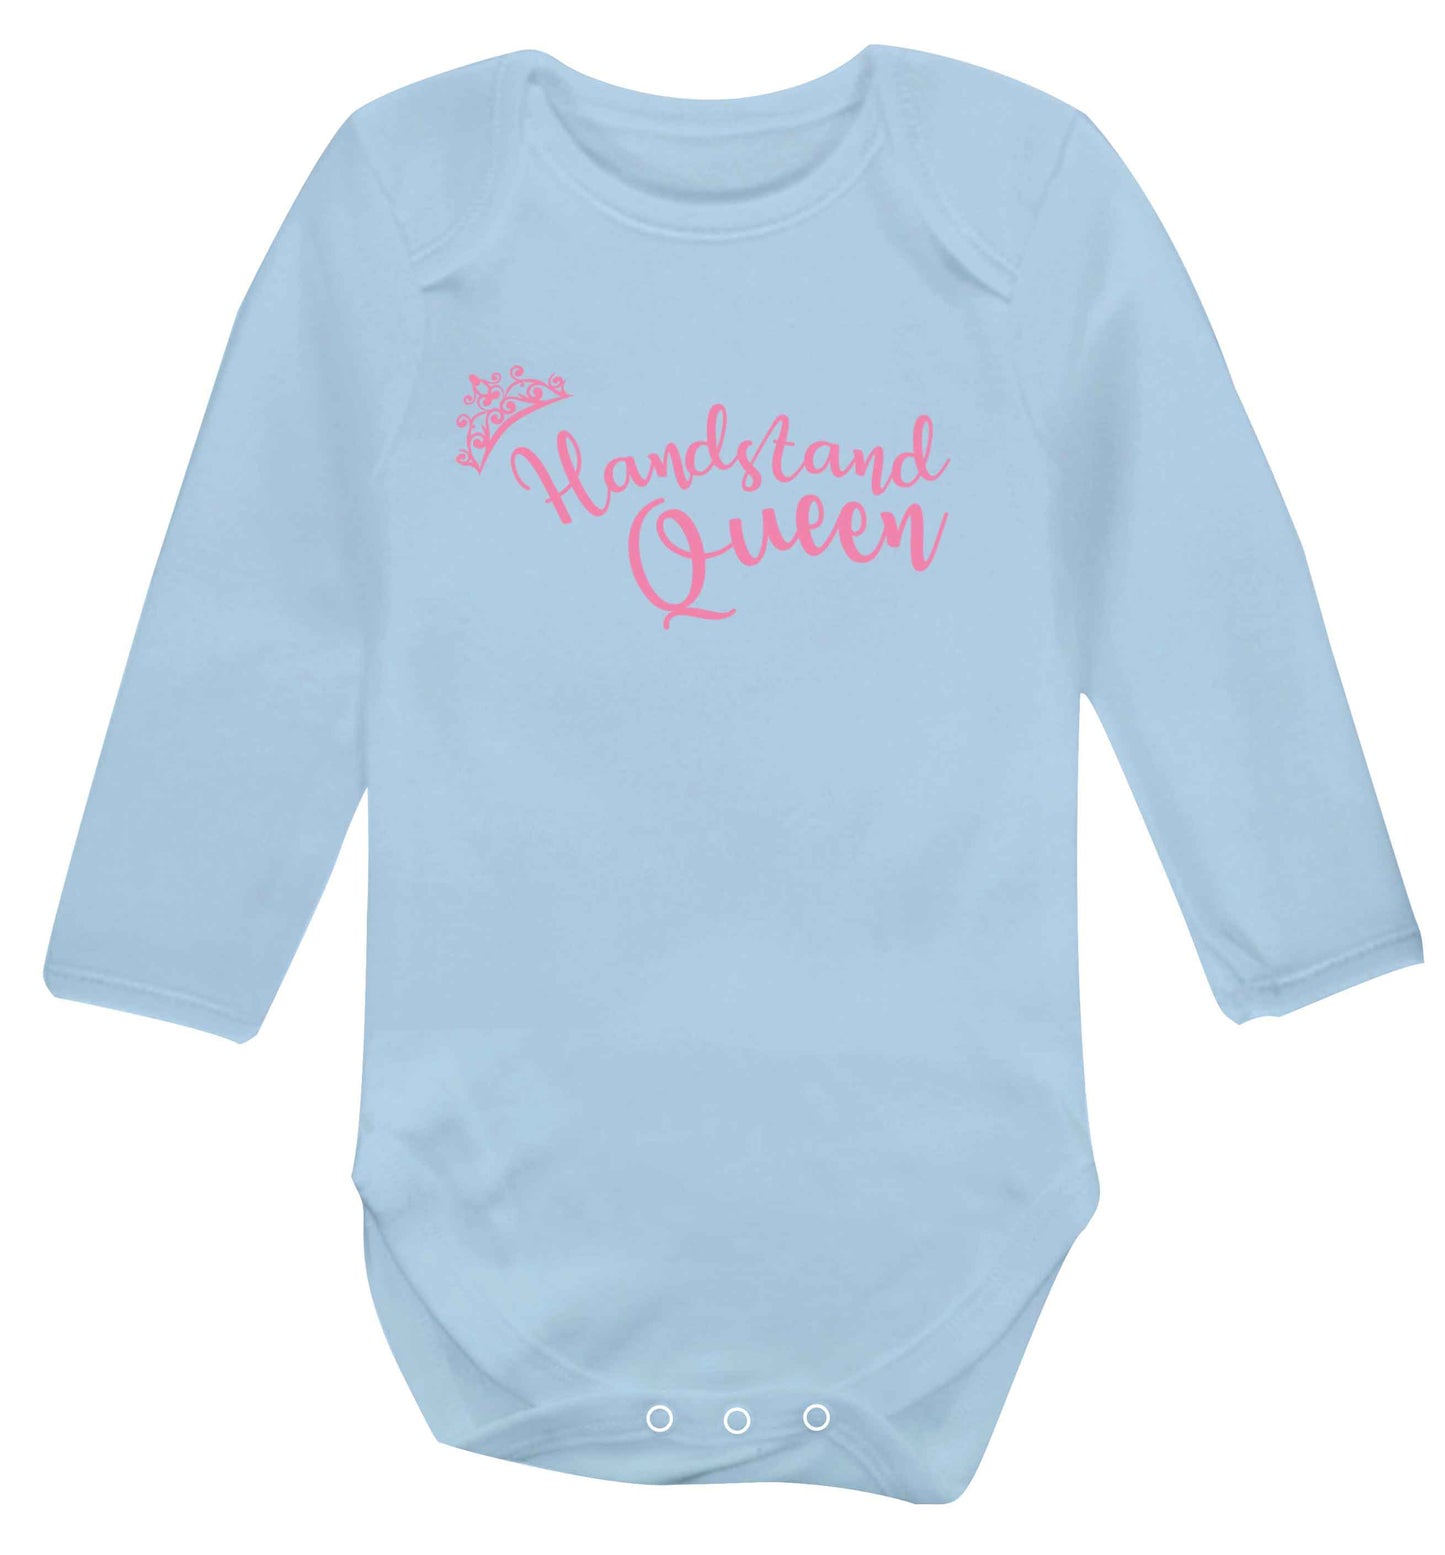 Handstand Queen Baby Vest long sleeved pale blue 6-12 months